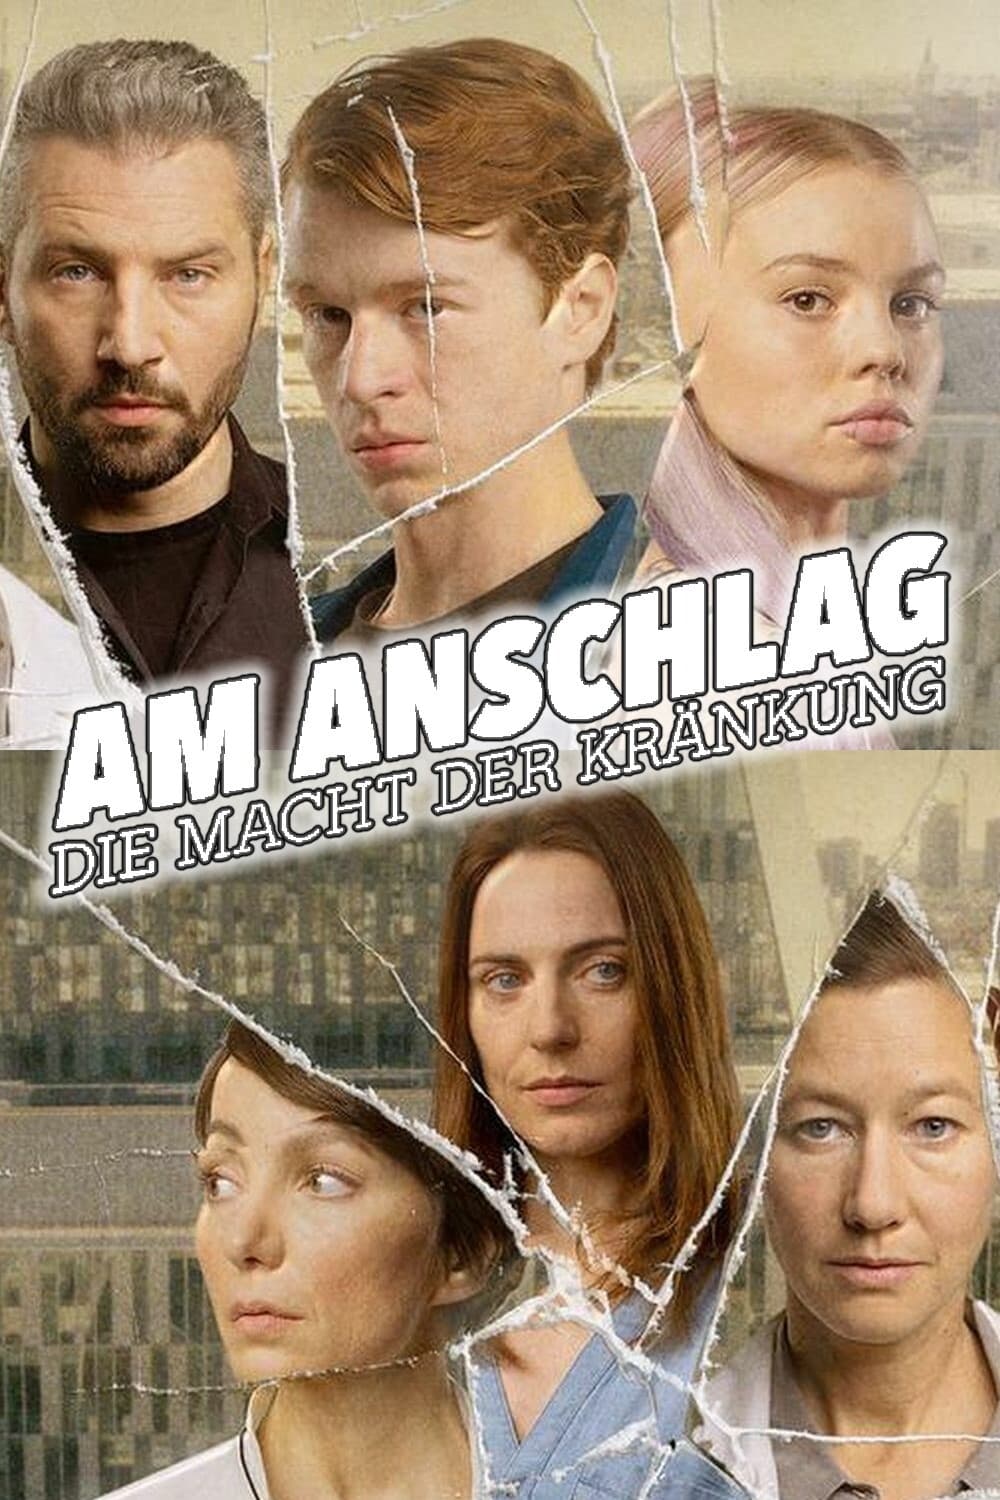 TV ratings for On The Edge - The Power Of Hurt (Am Anschlag - Die Macht Der Kränkung) in Canada. ZDFneo TV series